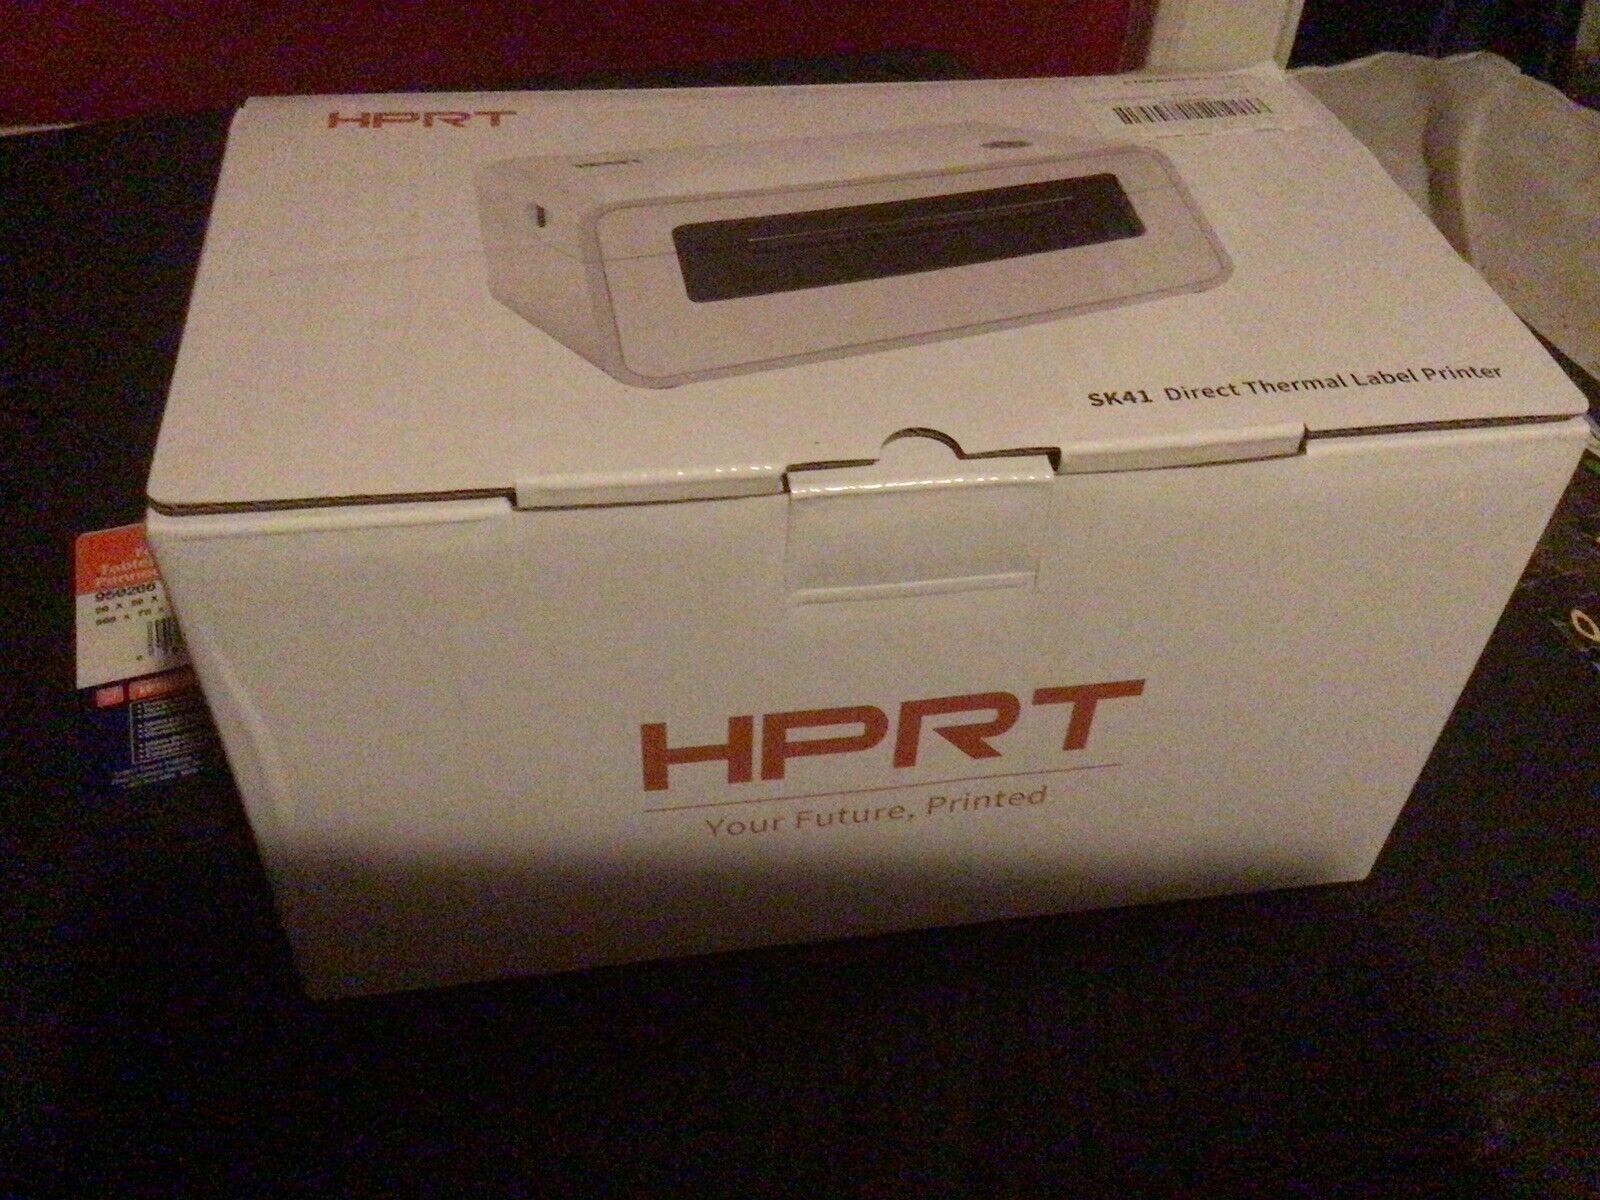 Shipping Label Printer HPRT. Brand New Never Removed From Box.